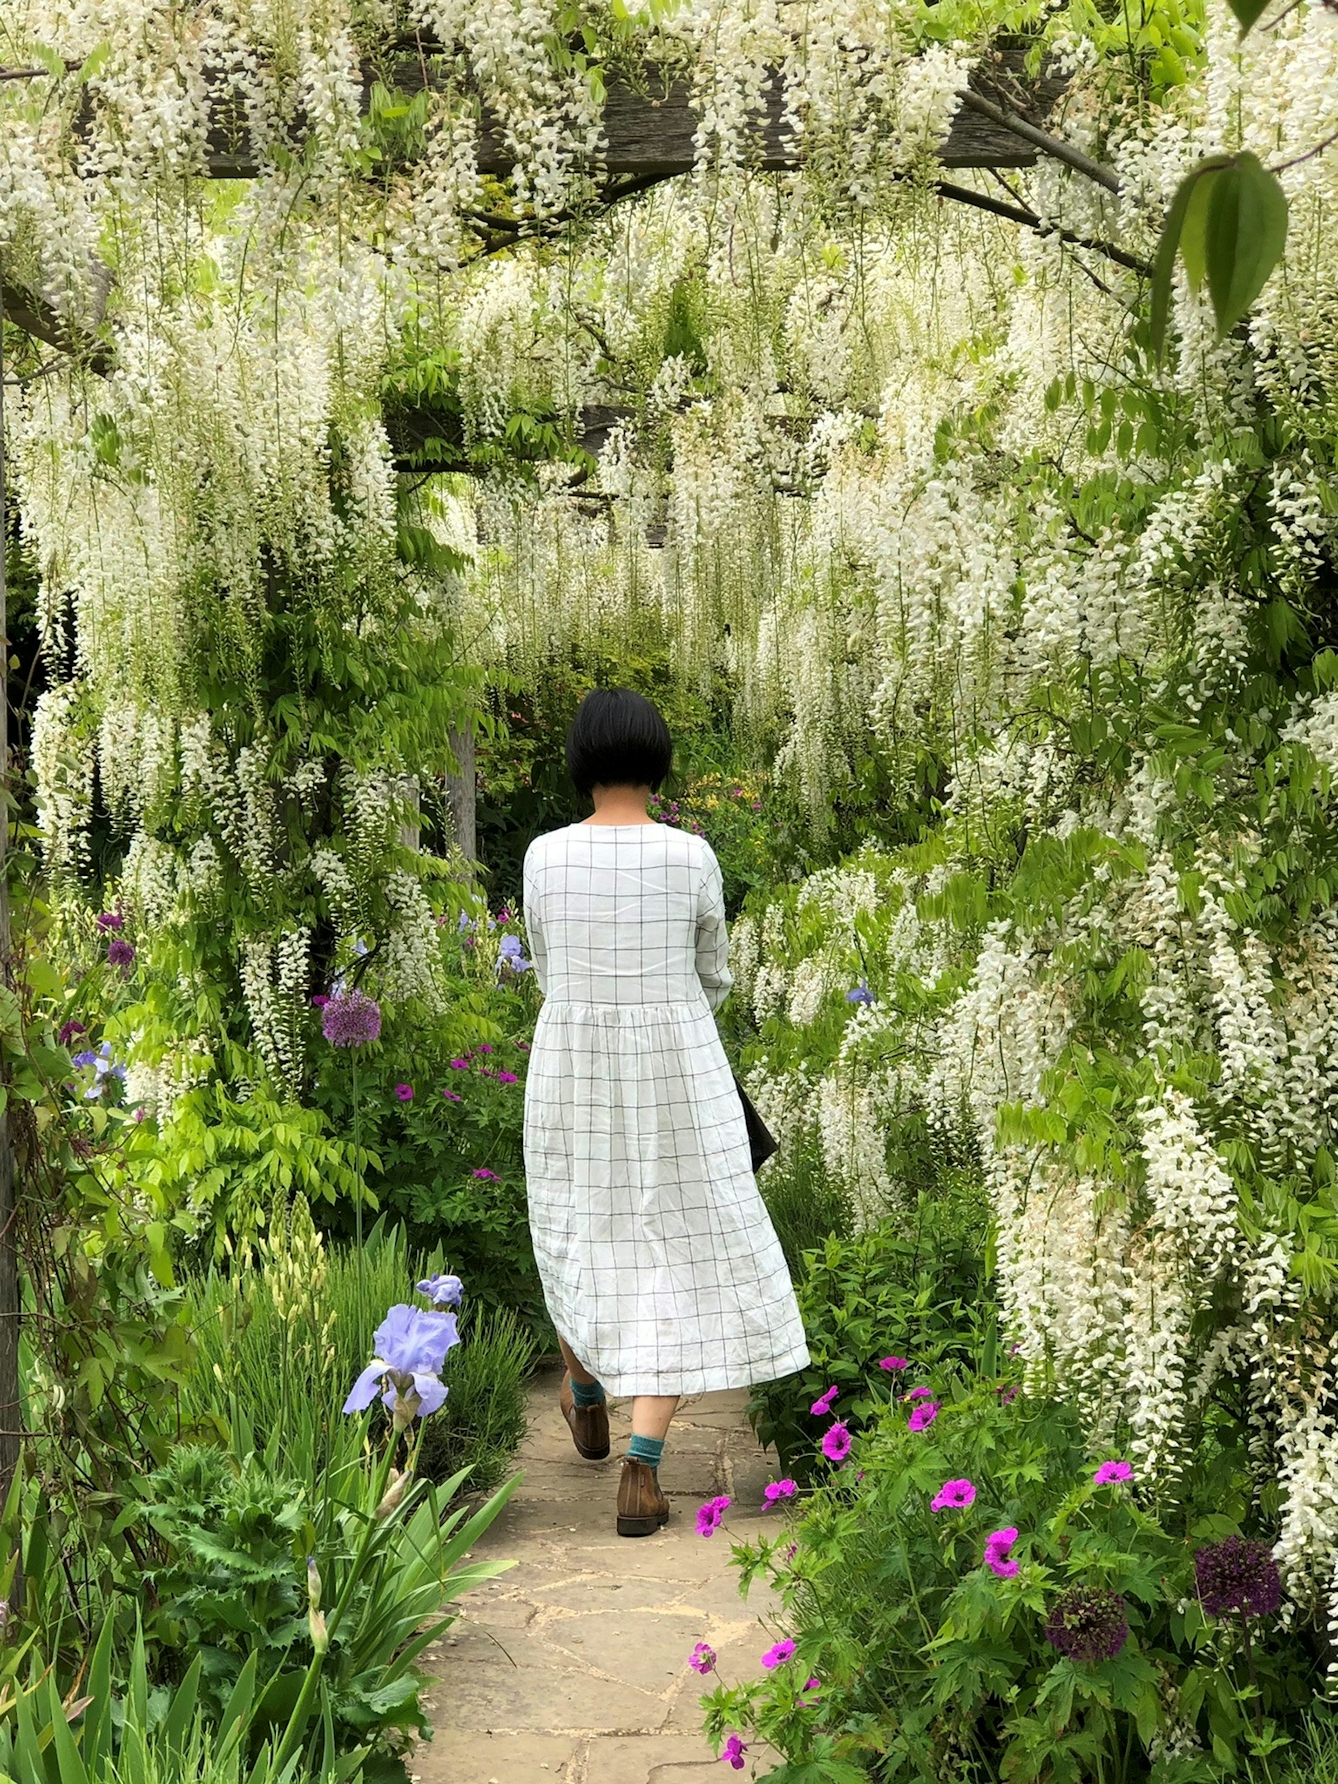 Colour photograph of a woman walking down a garden path. She is pictured from behind, wearing a long white dress and brown boots. The garden is full of flowers, which surround her on both sides and overhead.